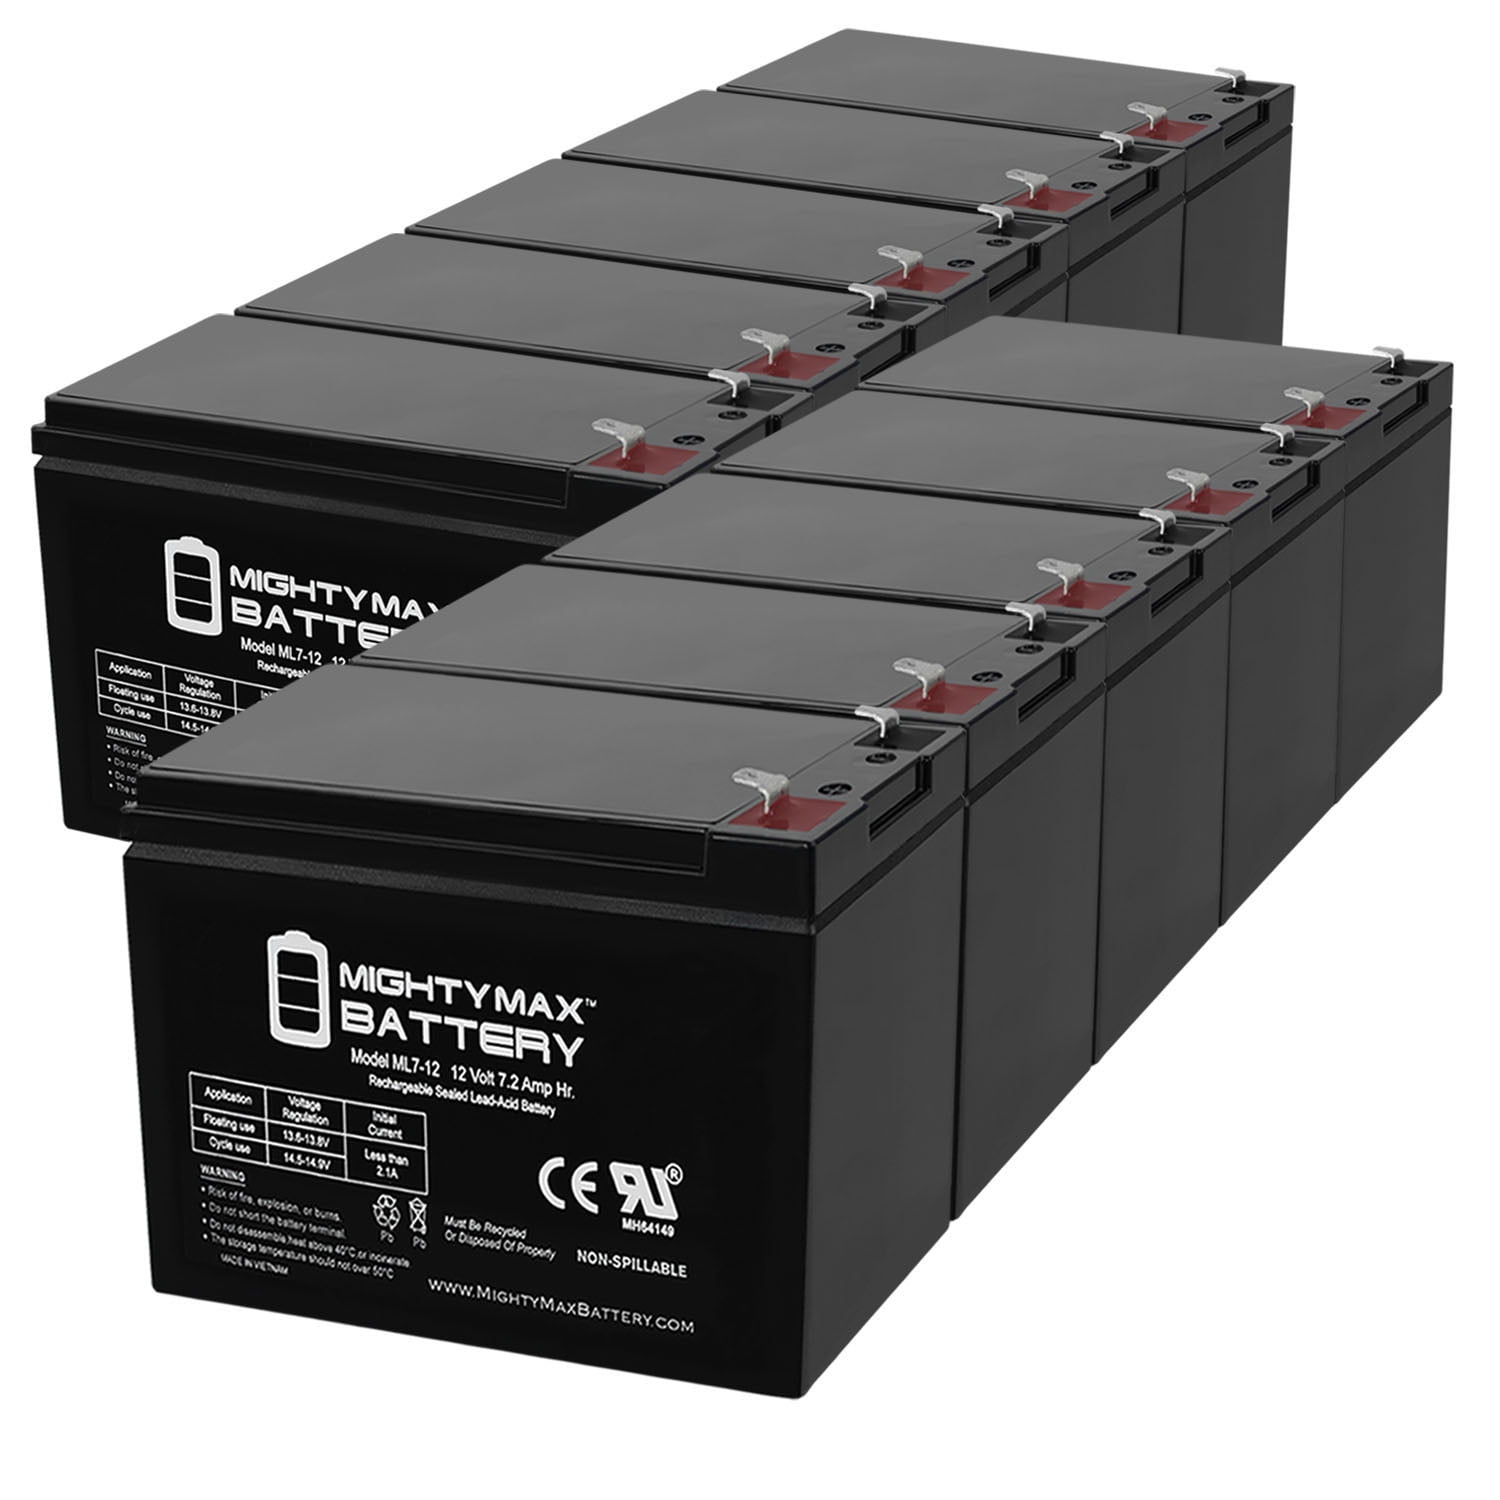 Mighty Max Battery 12V 7Ah UPS Battery for Emerson AU1000-4 Pack Brand Product 